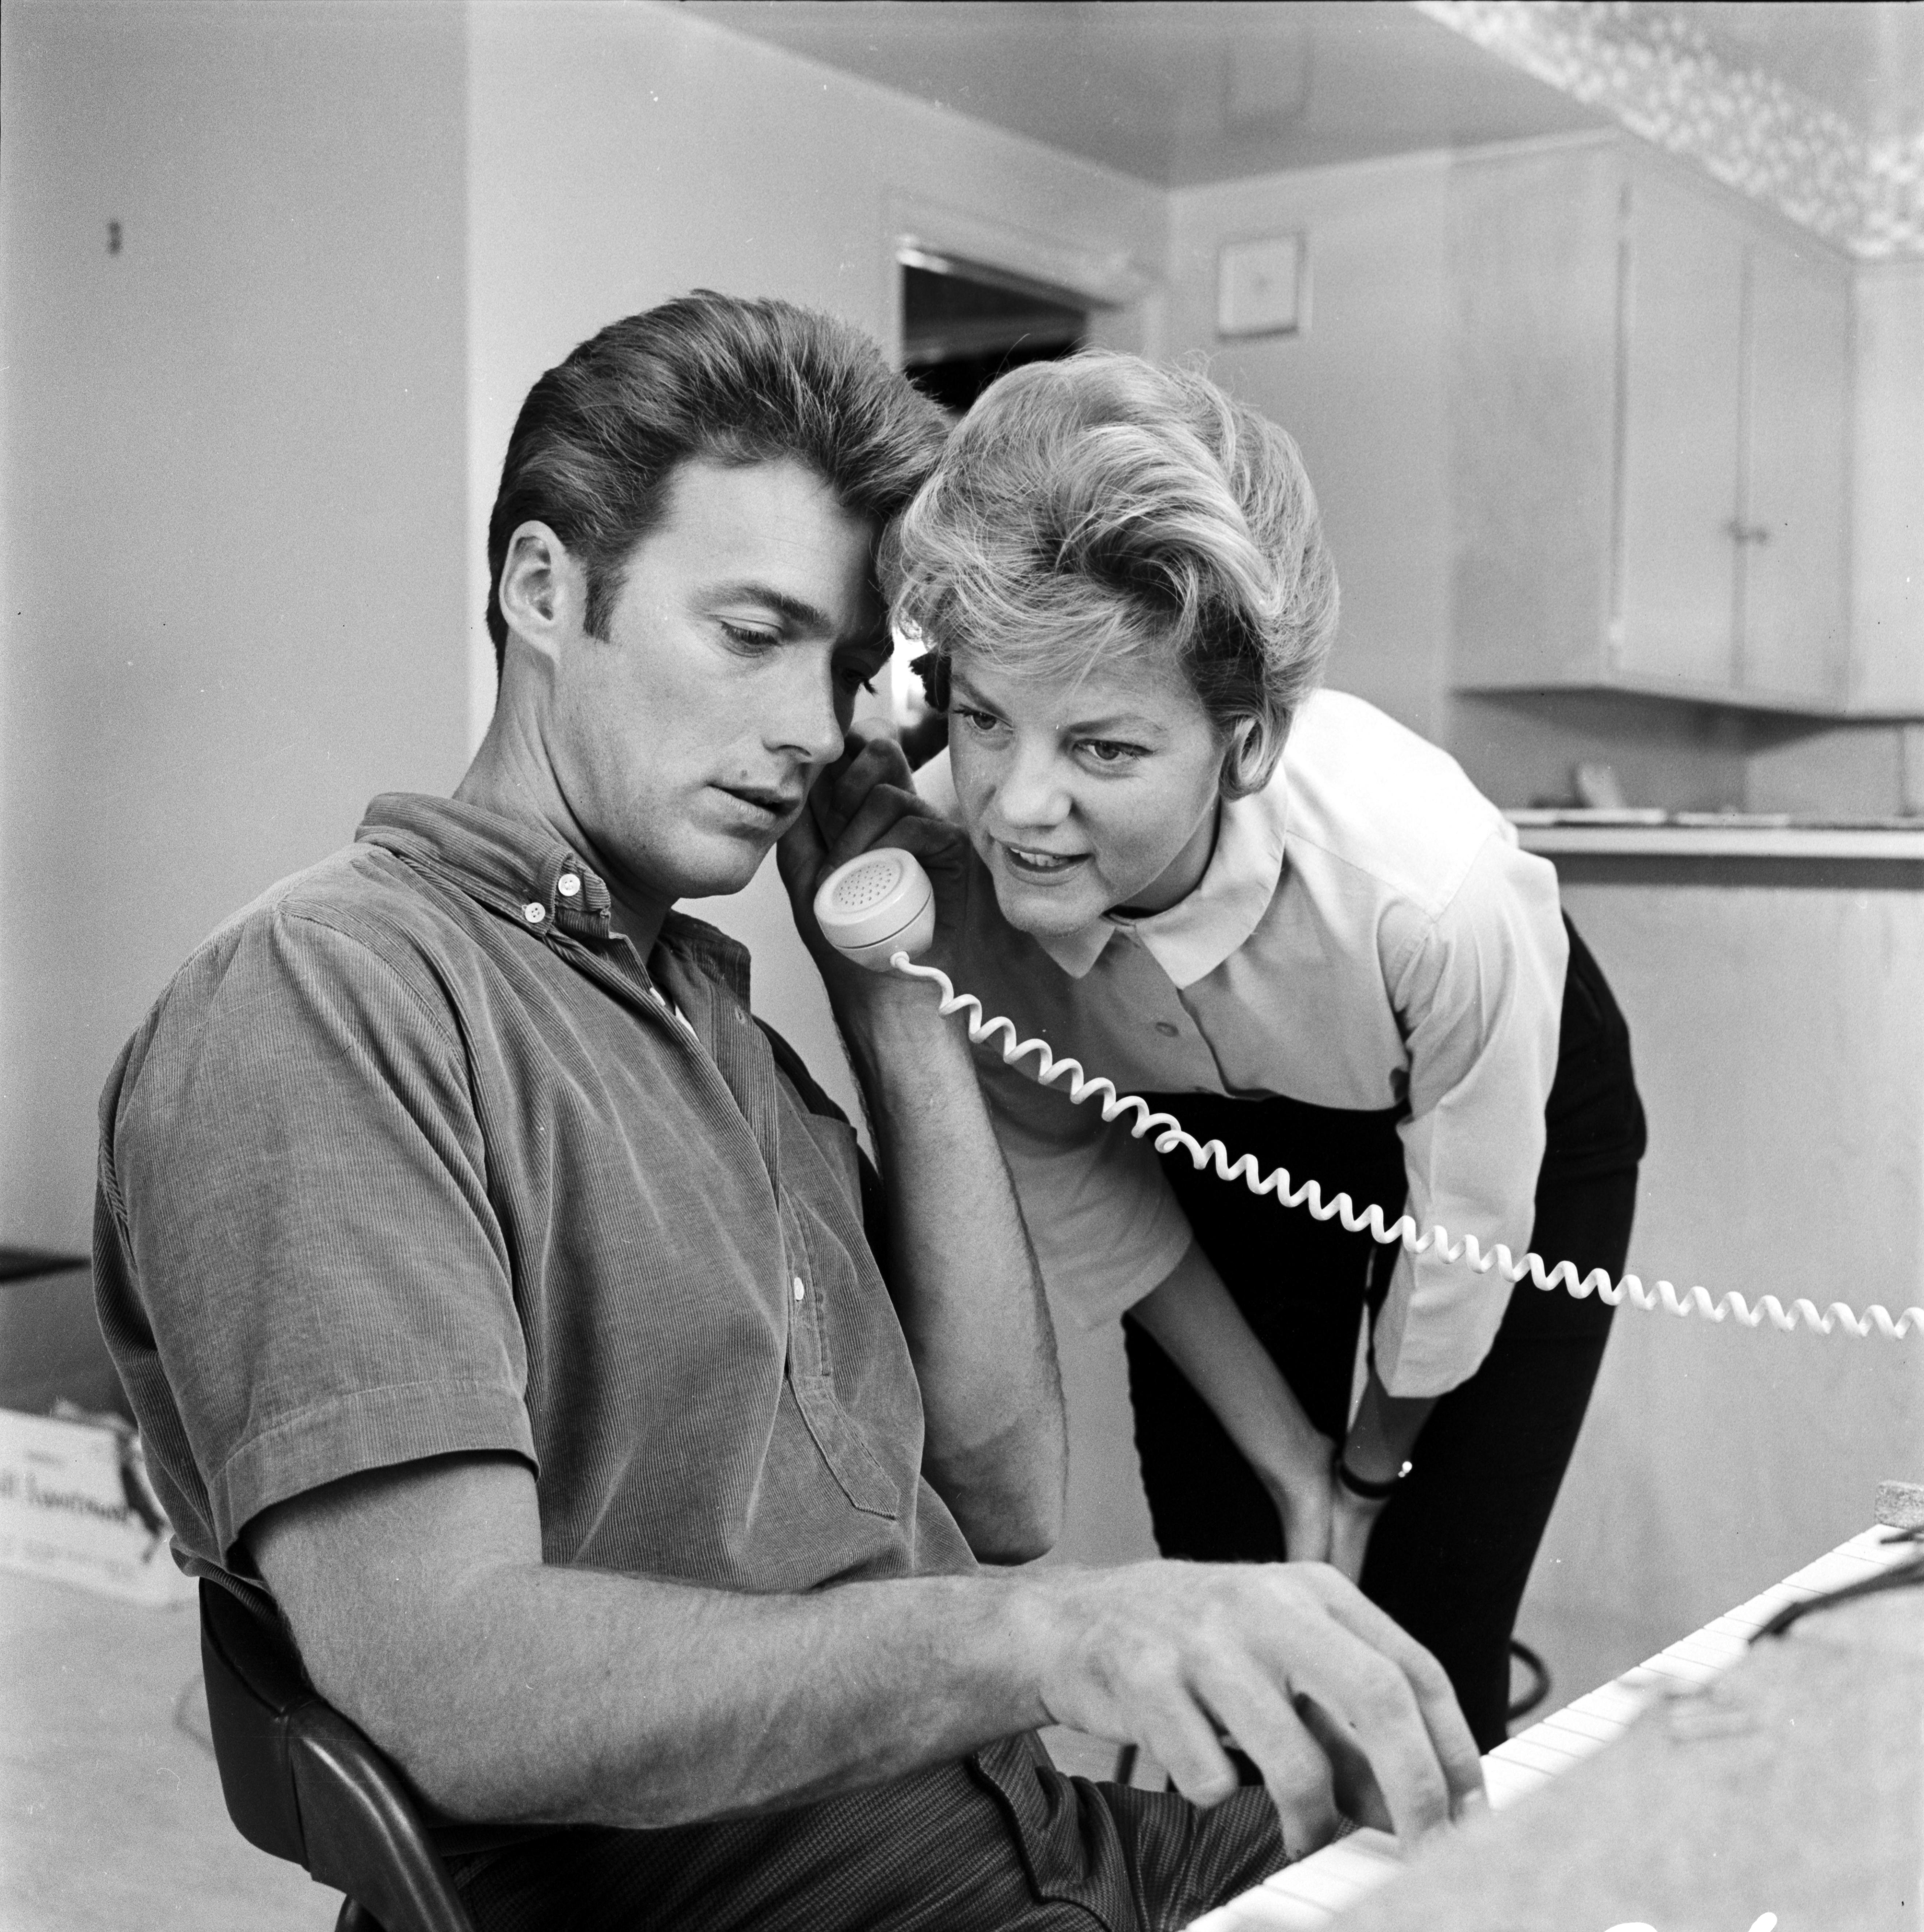 Larry Barbier Portrait Photograph - Clint Eastwood Talking on the Phone with Wife at Home Fine Art Print